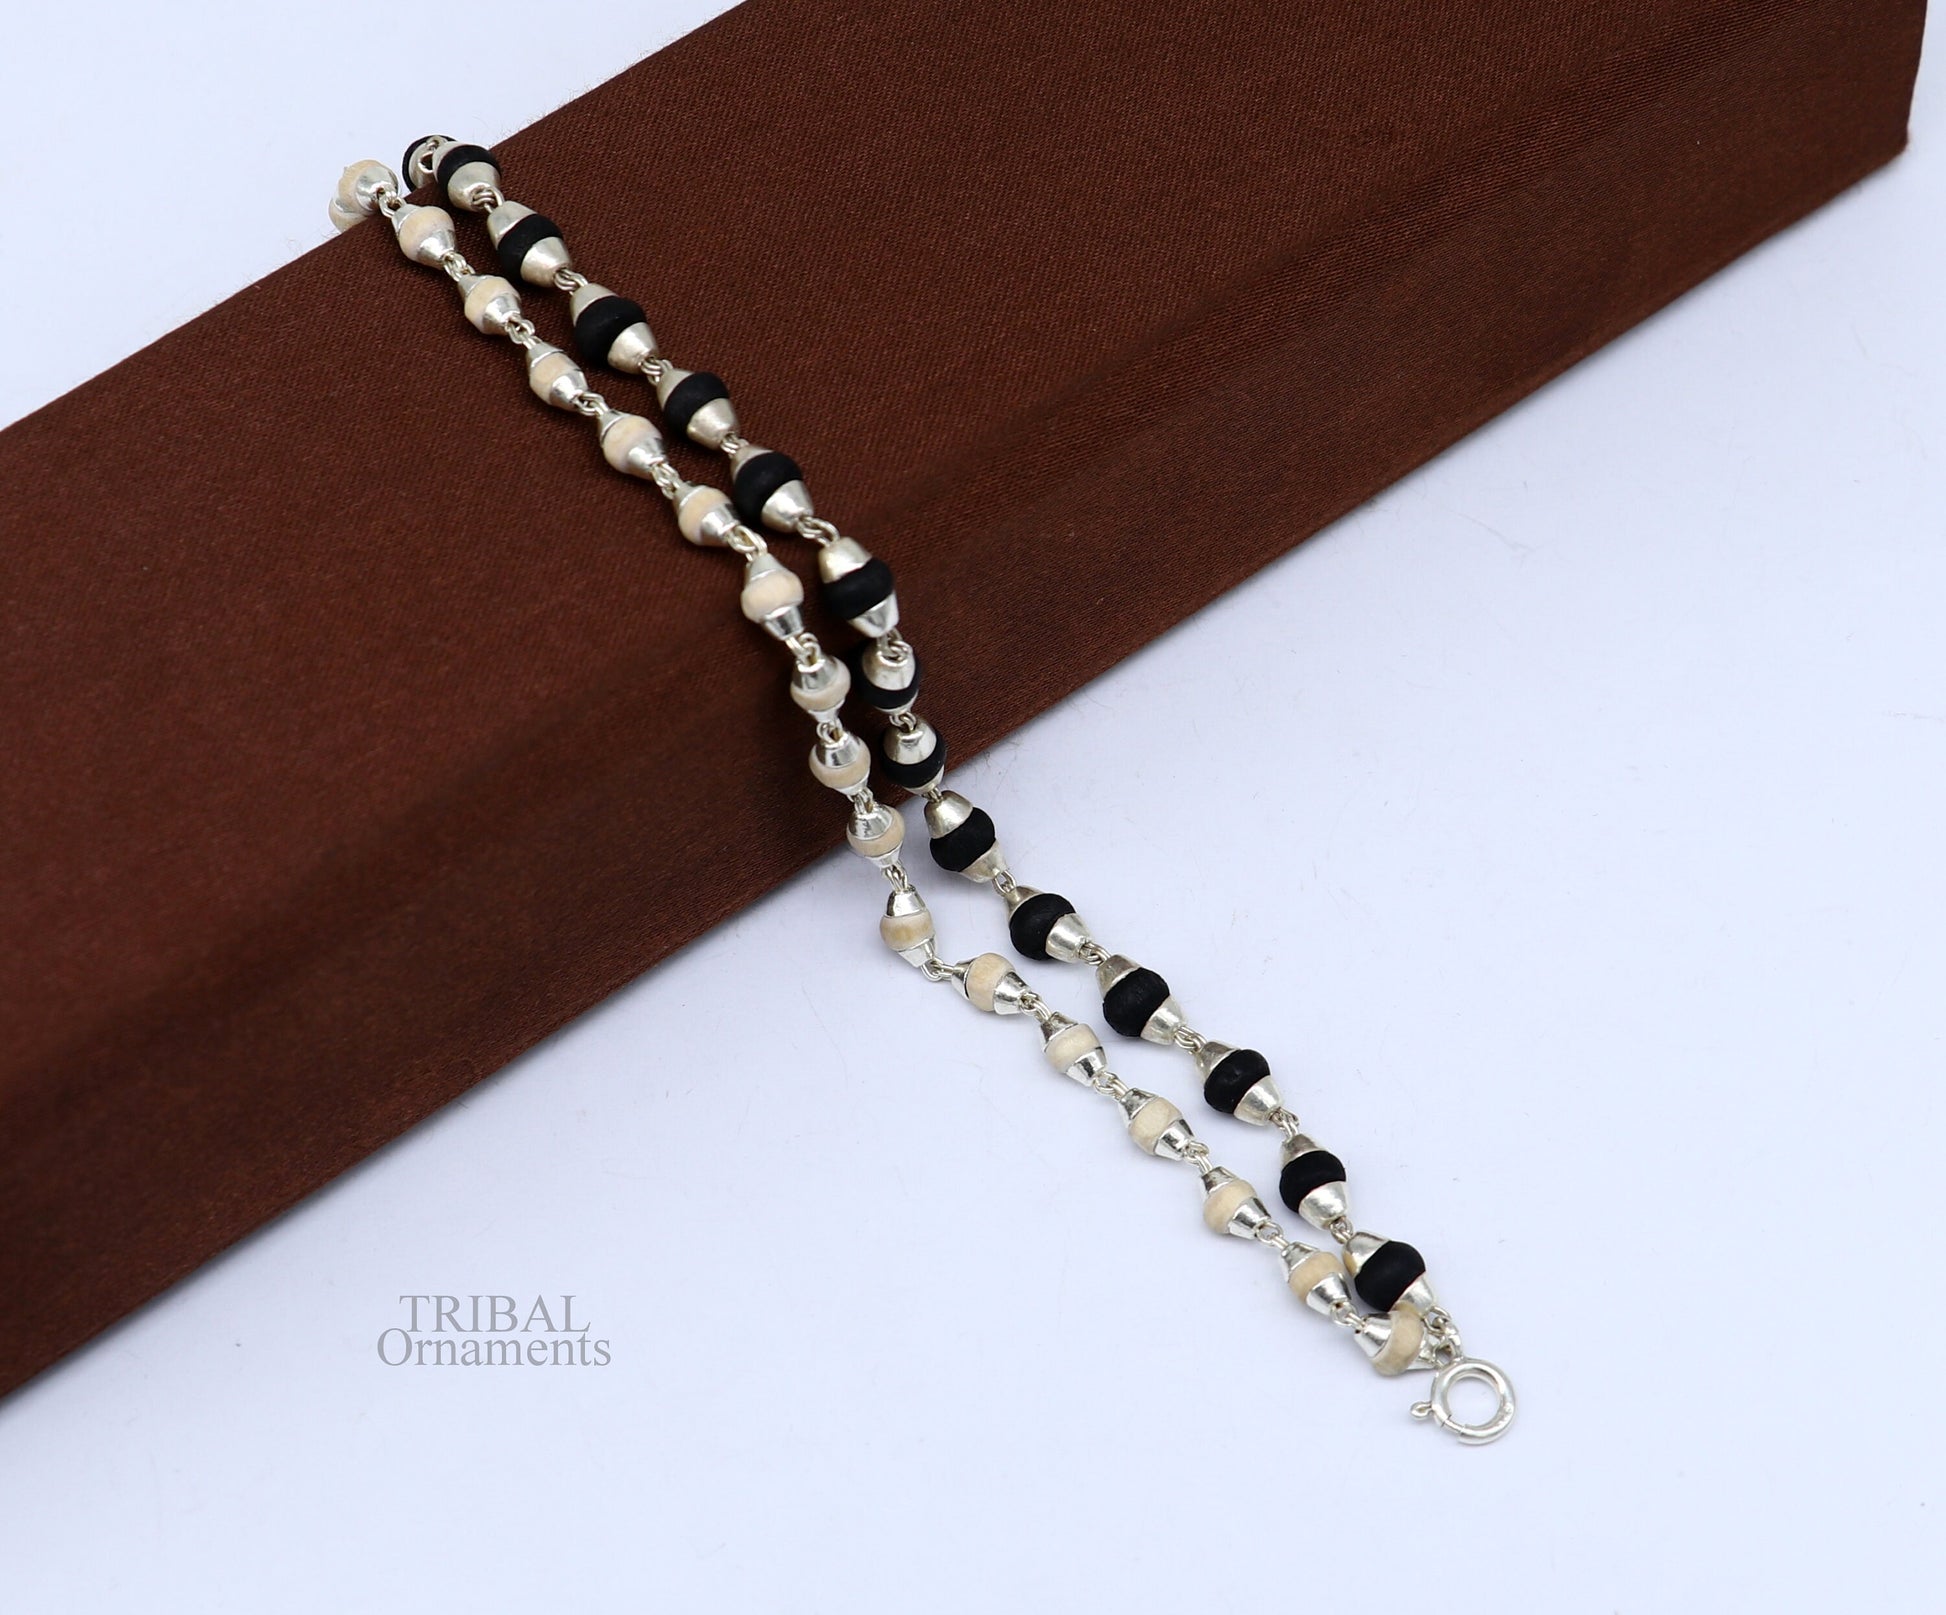 Black and white holy basil rosary plant /tulsi plant wood beaded Sterling silver handmade fabulous 2 line bracelet jewelry India sbr264 - TRIBAL ORNAMENTS